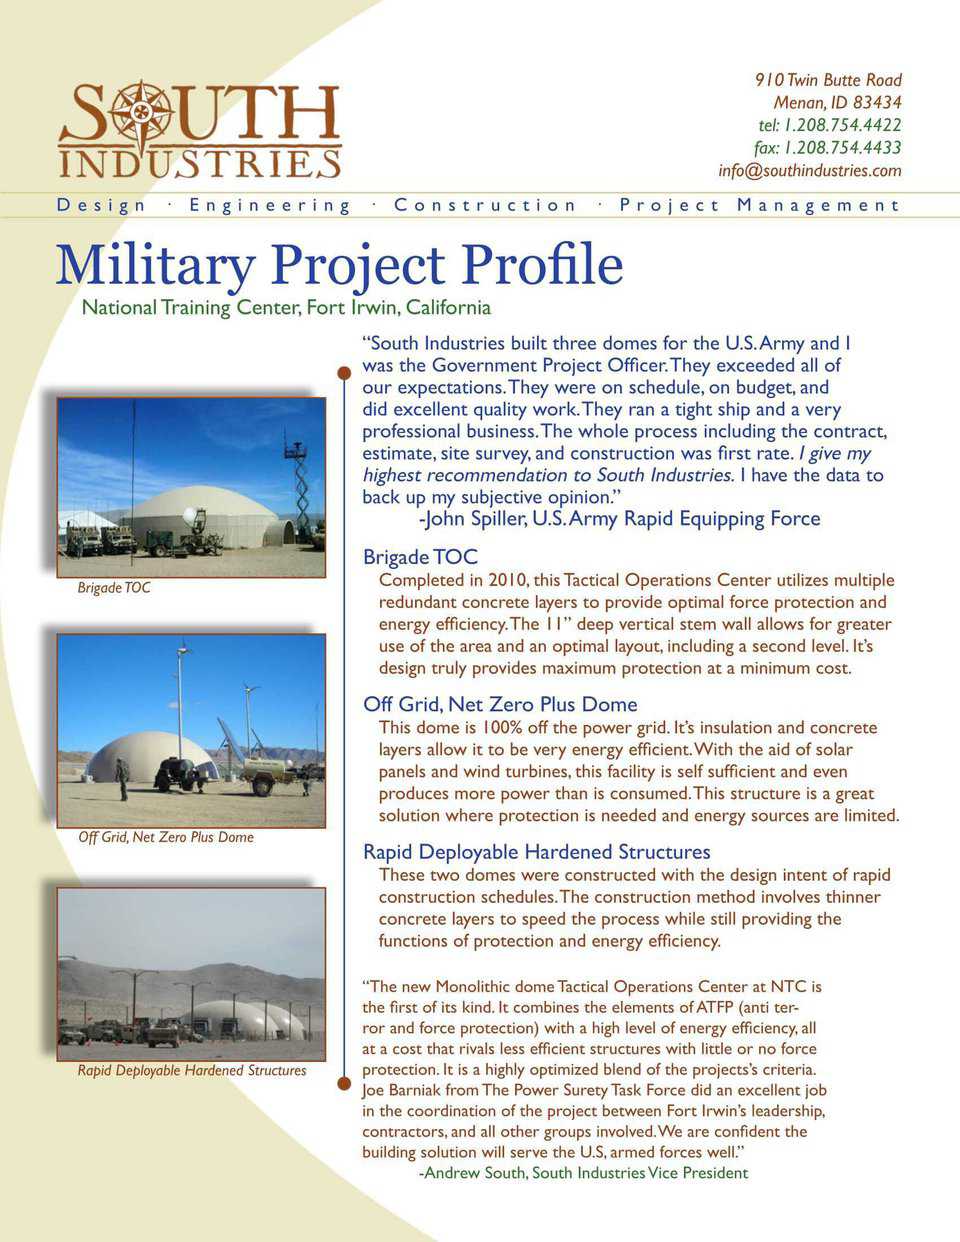 Military dome project